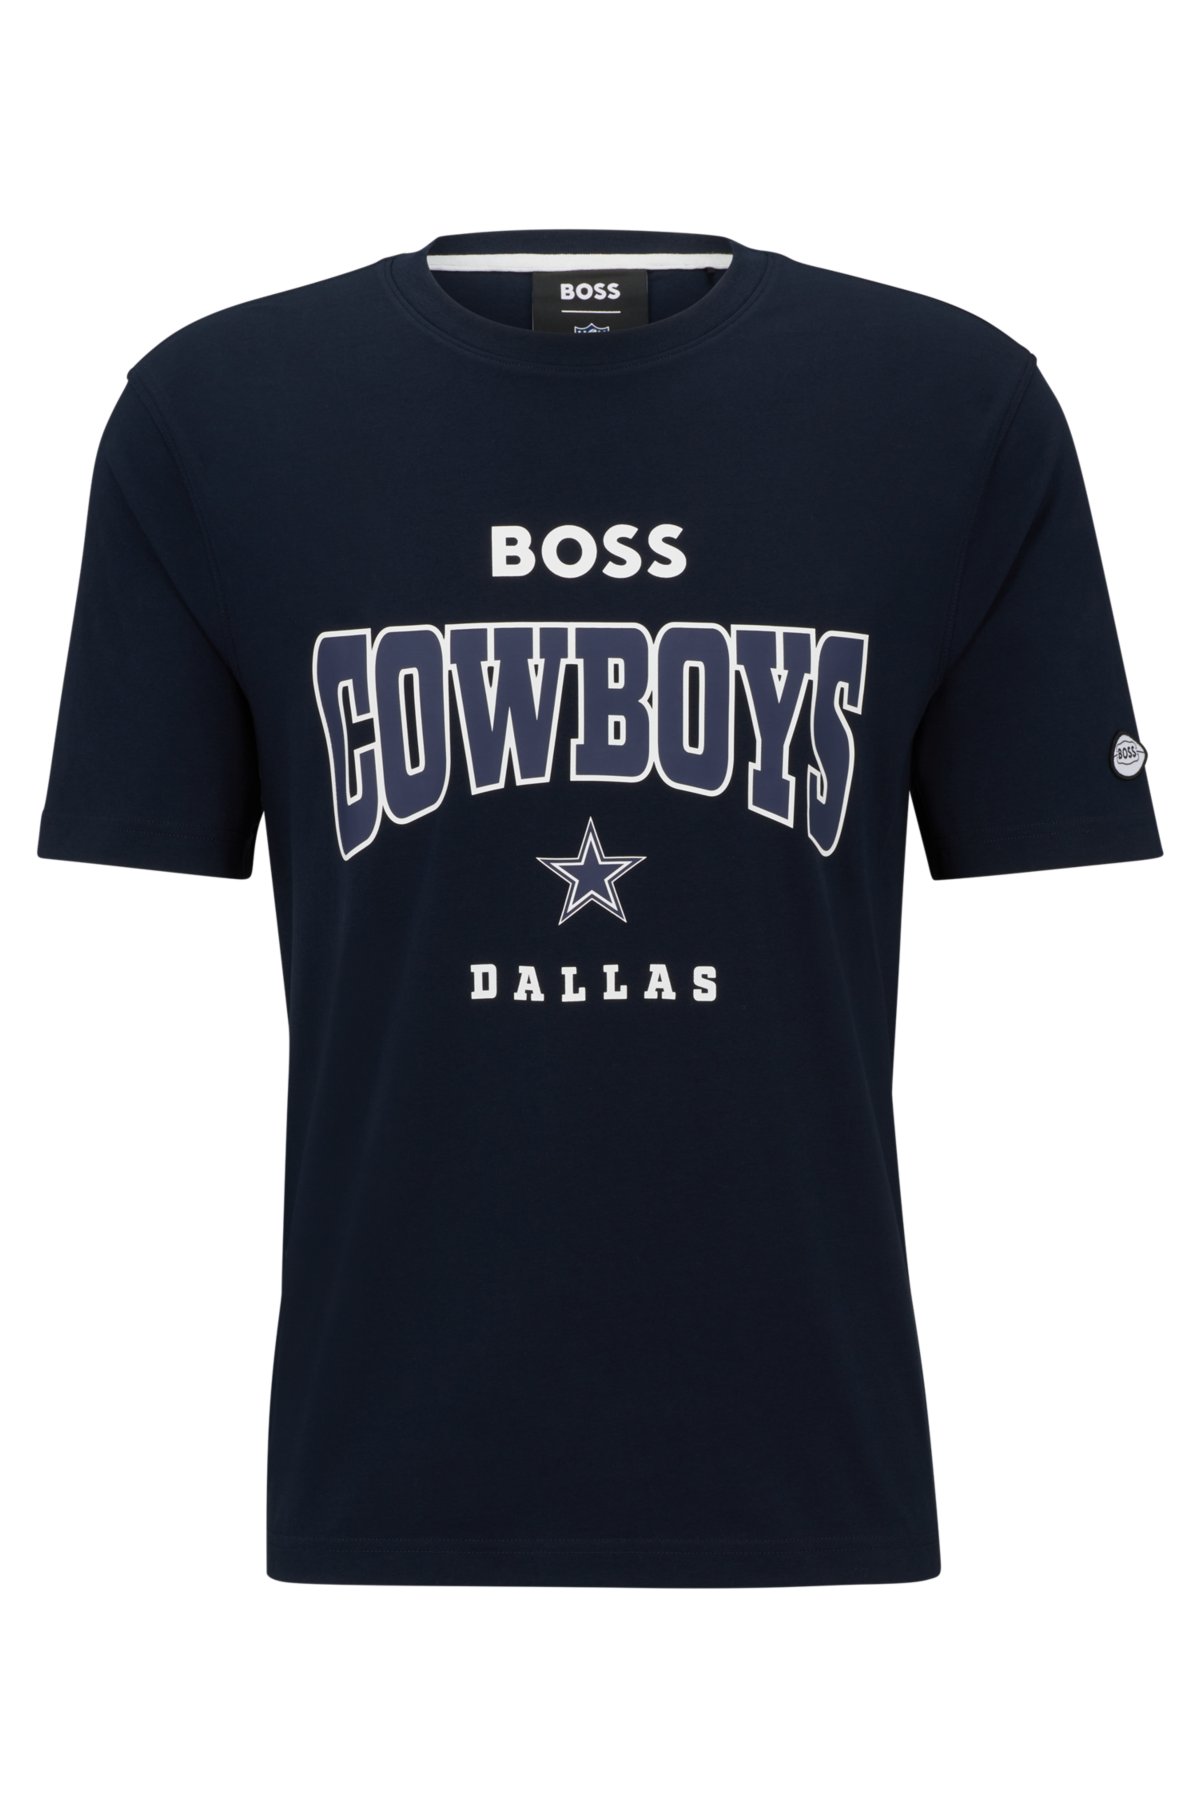 BOSS x NFL stretch-cotton T-shirt with collaborative branding, Cowboys